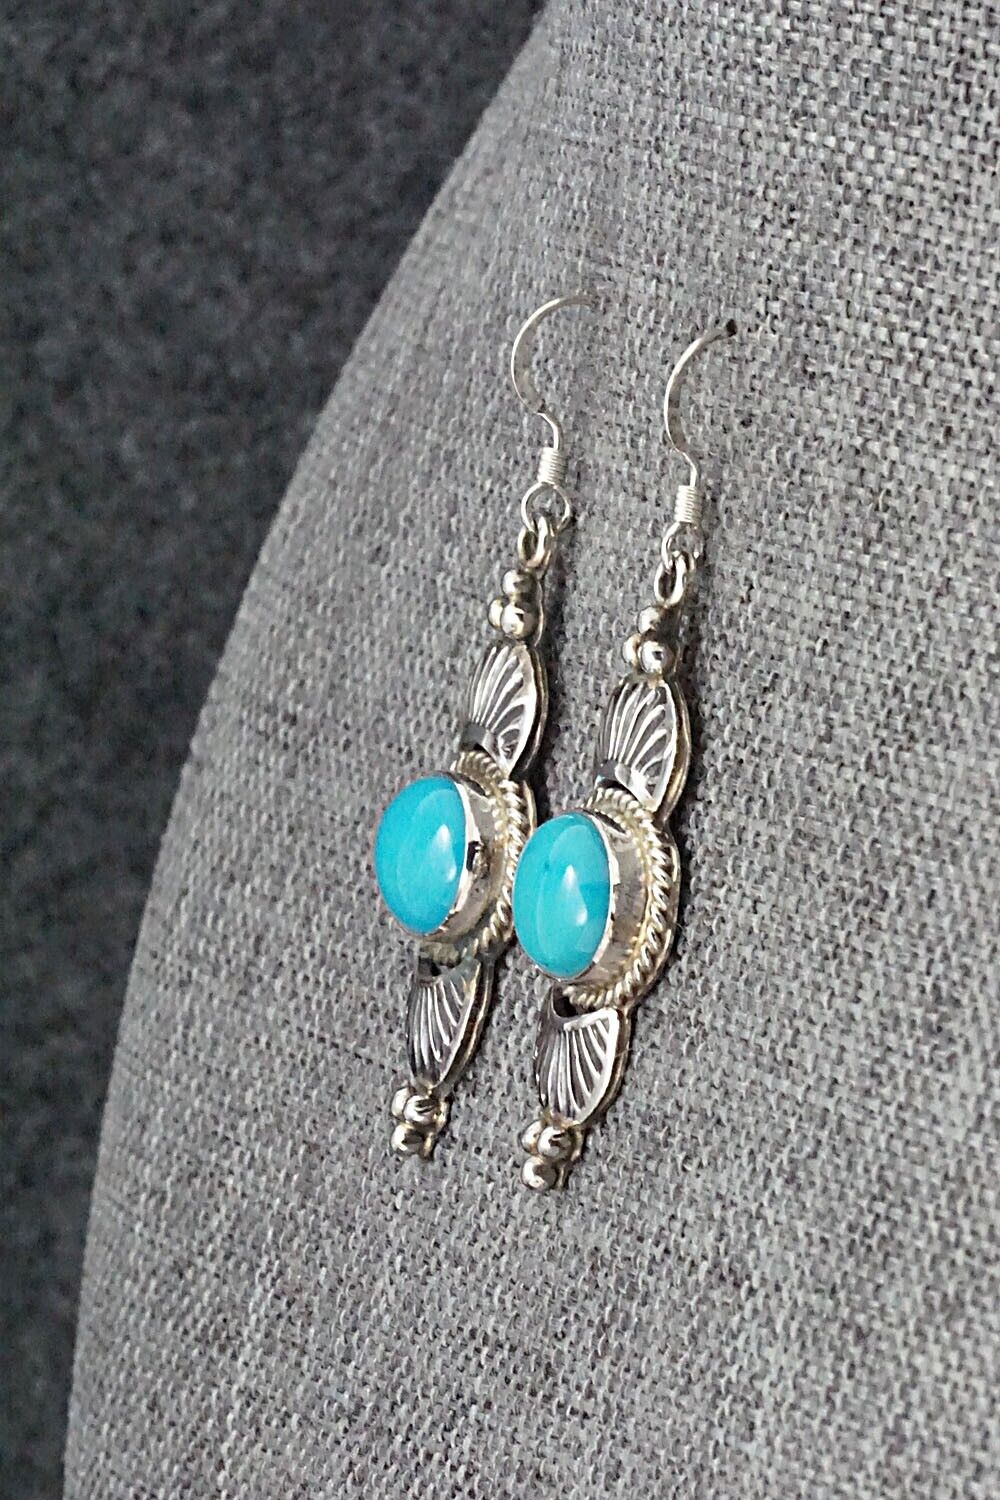 Turquoise & Sterling Silver Earrings - Michael Calladitto